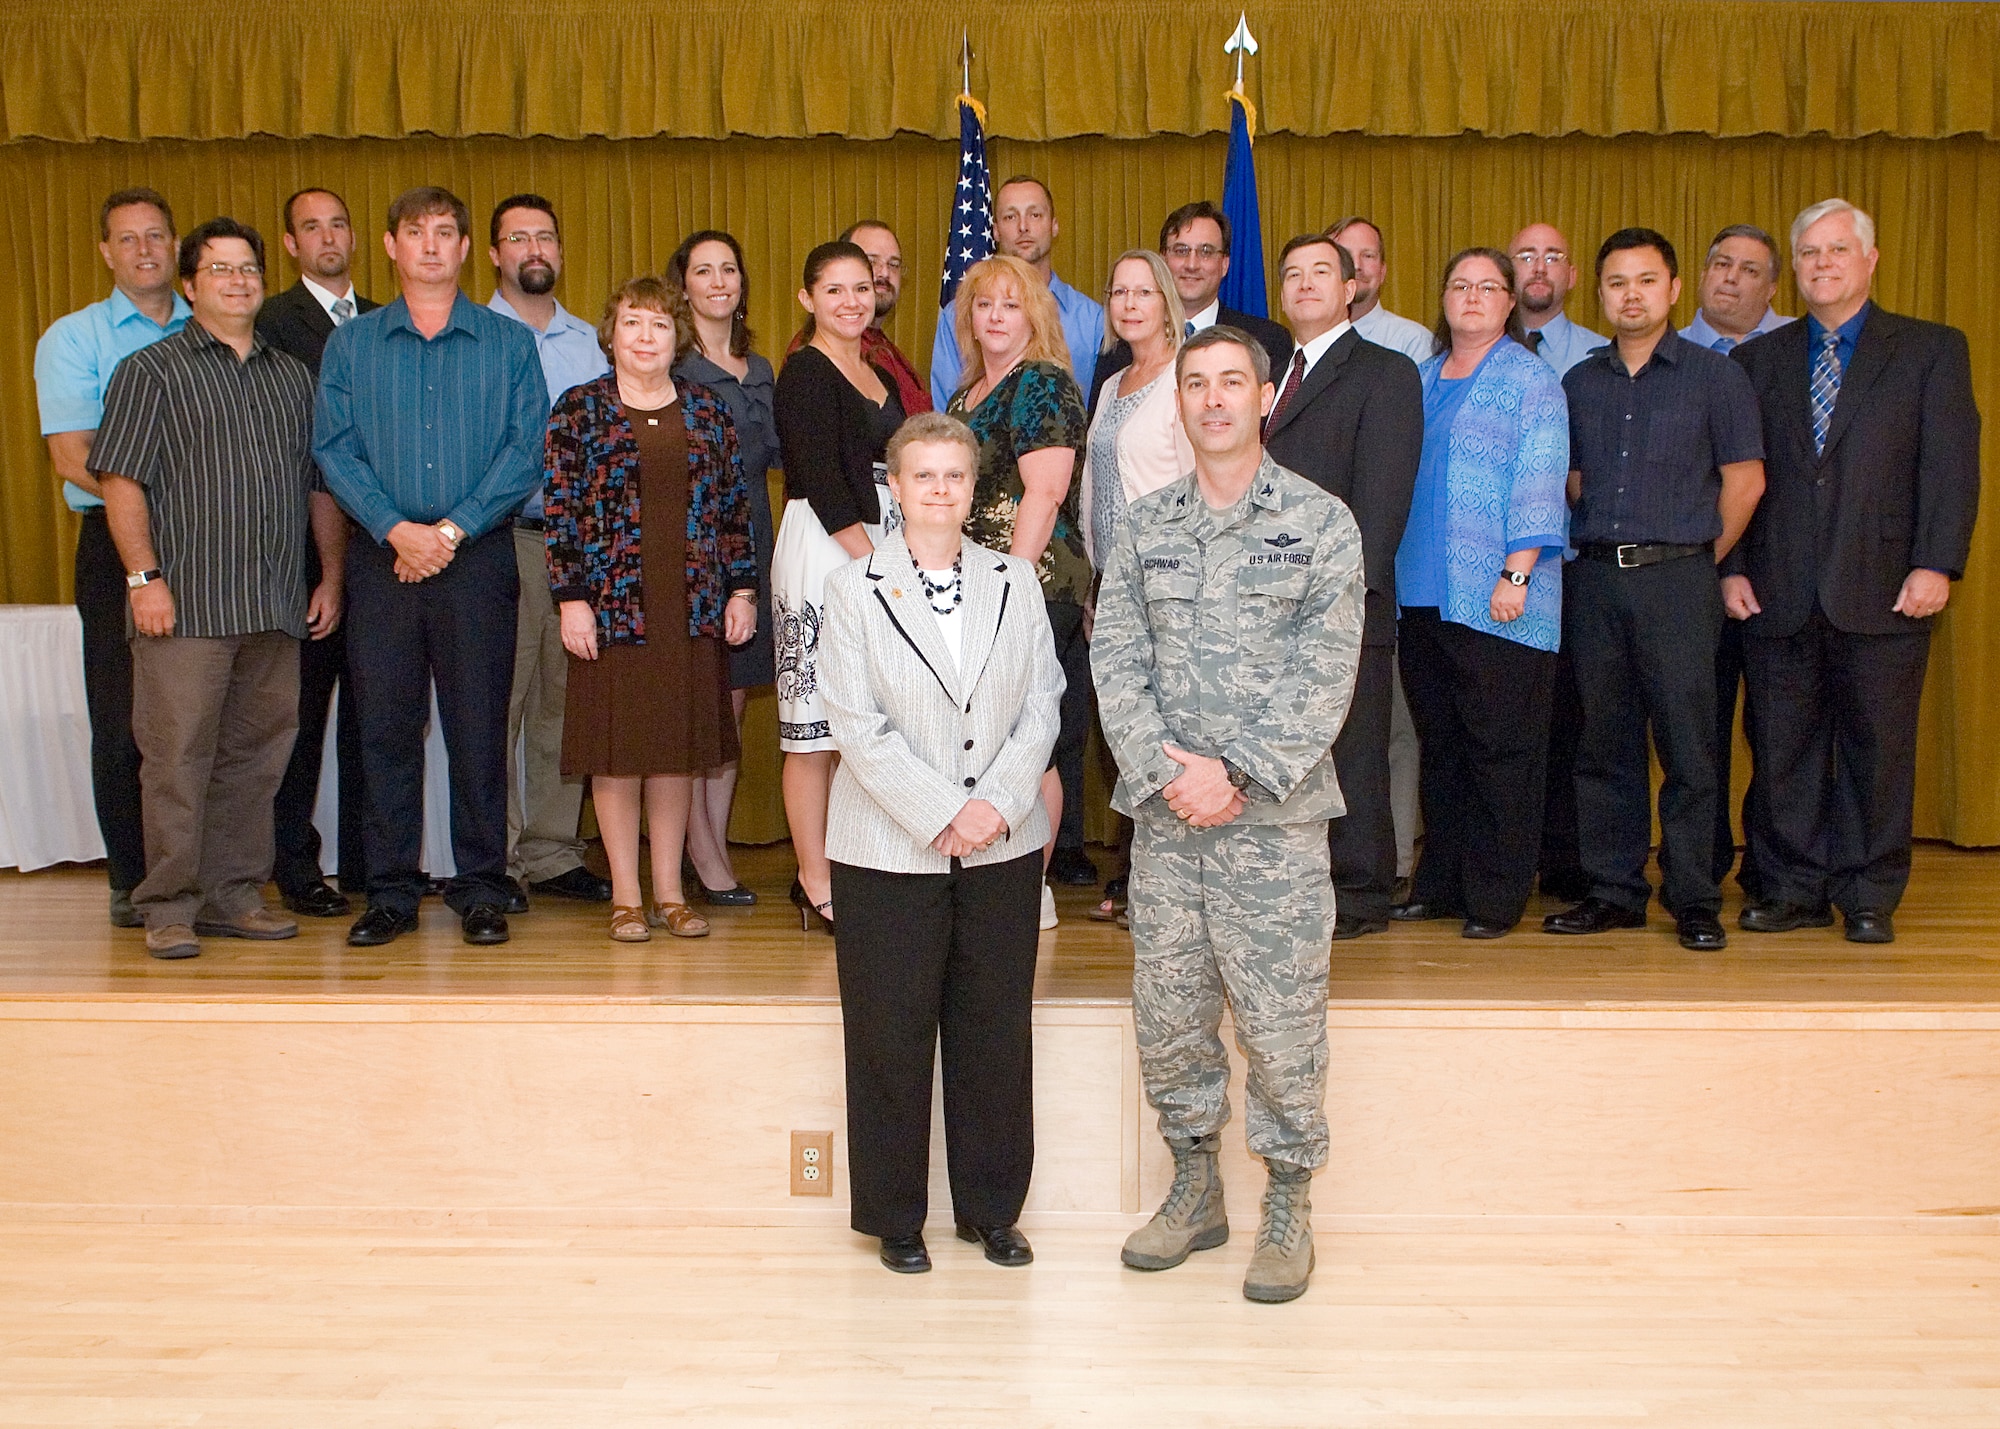 Col. Gregory Schwab, 95th Air Base Wing commander, poses with Denise Humphrey, Deputy Director, Center for Development of Security Excellence Directorate at Defense Security Service, in front of security professionals who were certified through the DSS's Security Professional Education Development program.  May 31, Team Edwards members and government civilians from the region received Department of Defense certificates for passing DOD certification tests.  (U.S. Air Force photo by Edward Cannon)